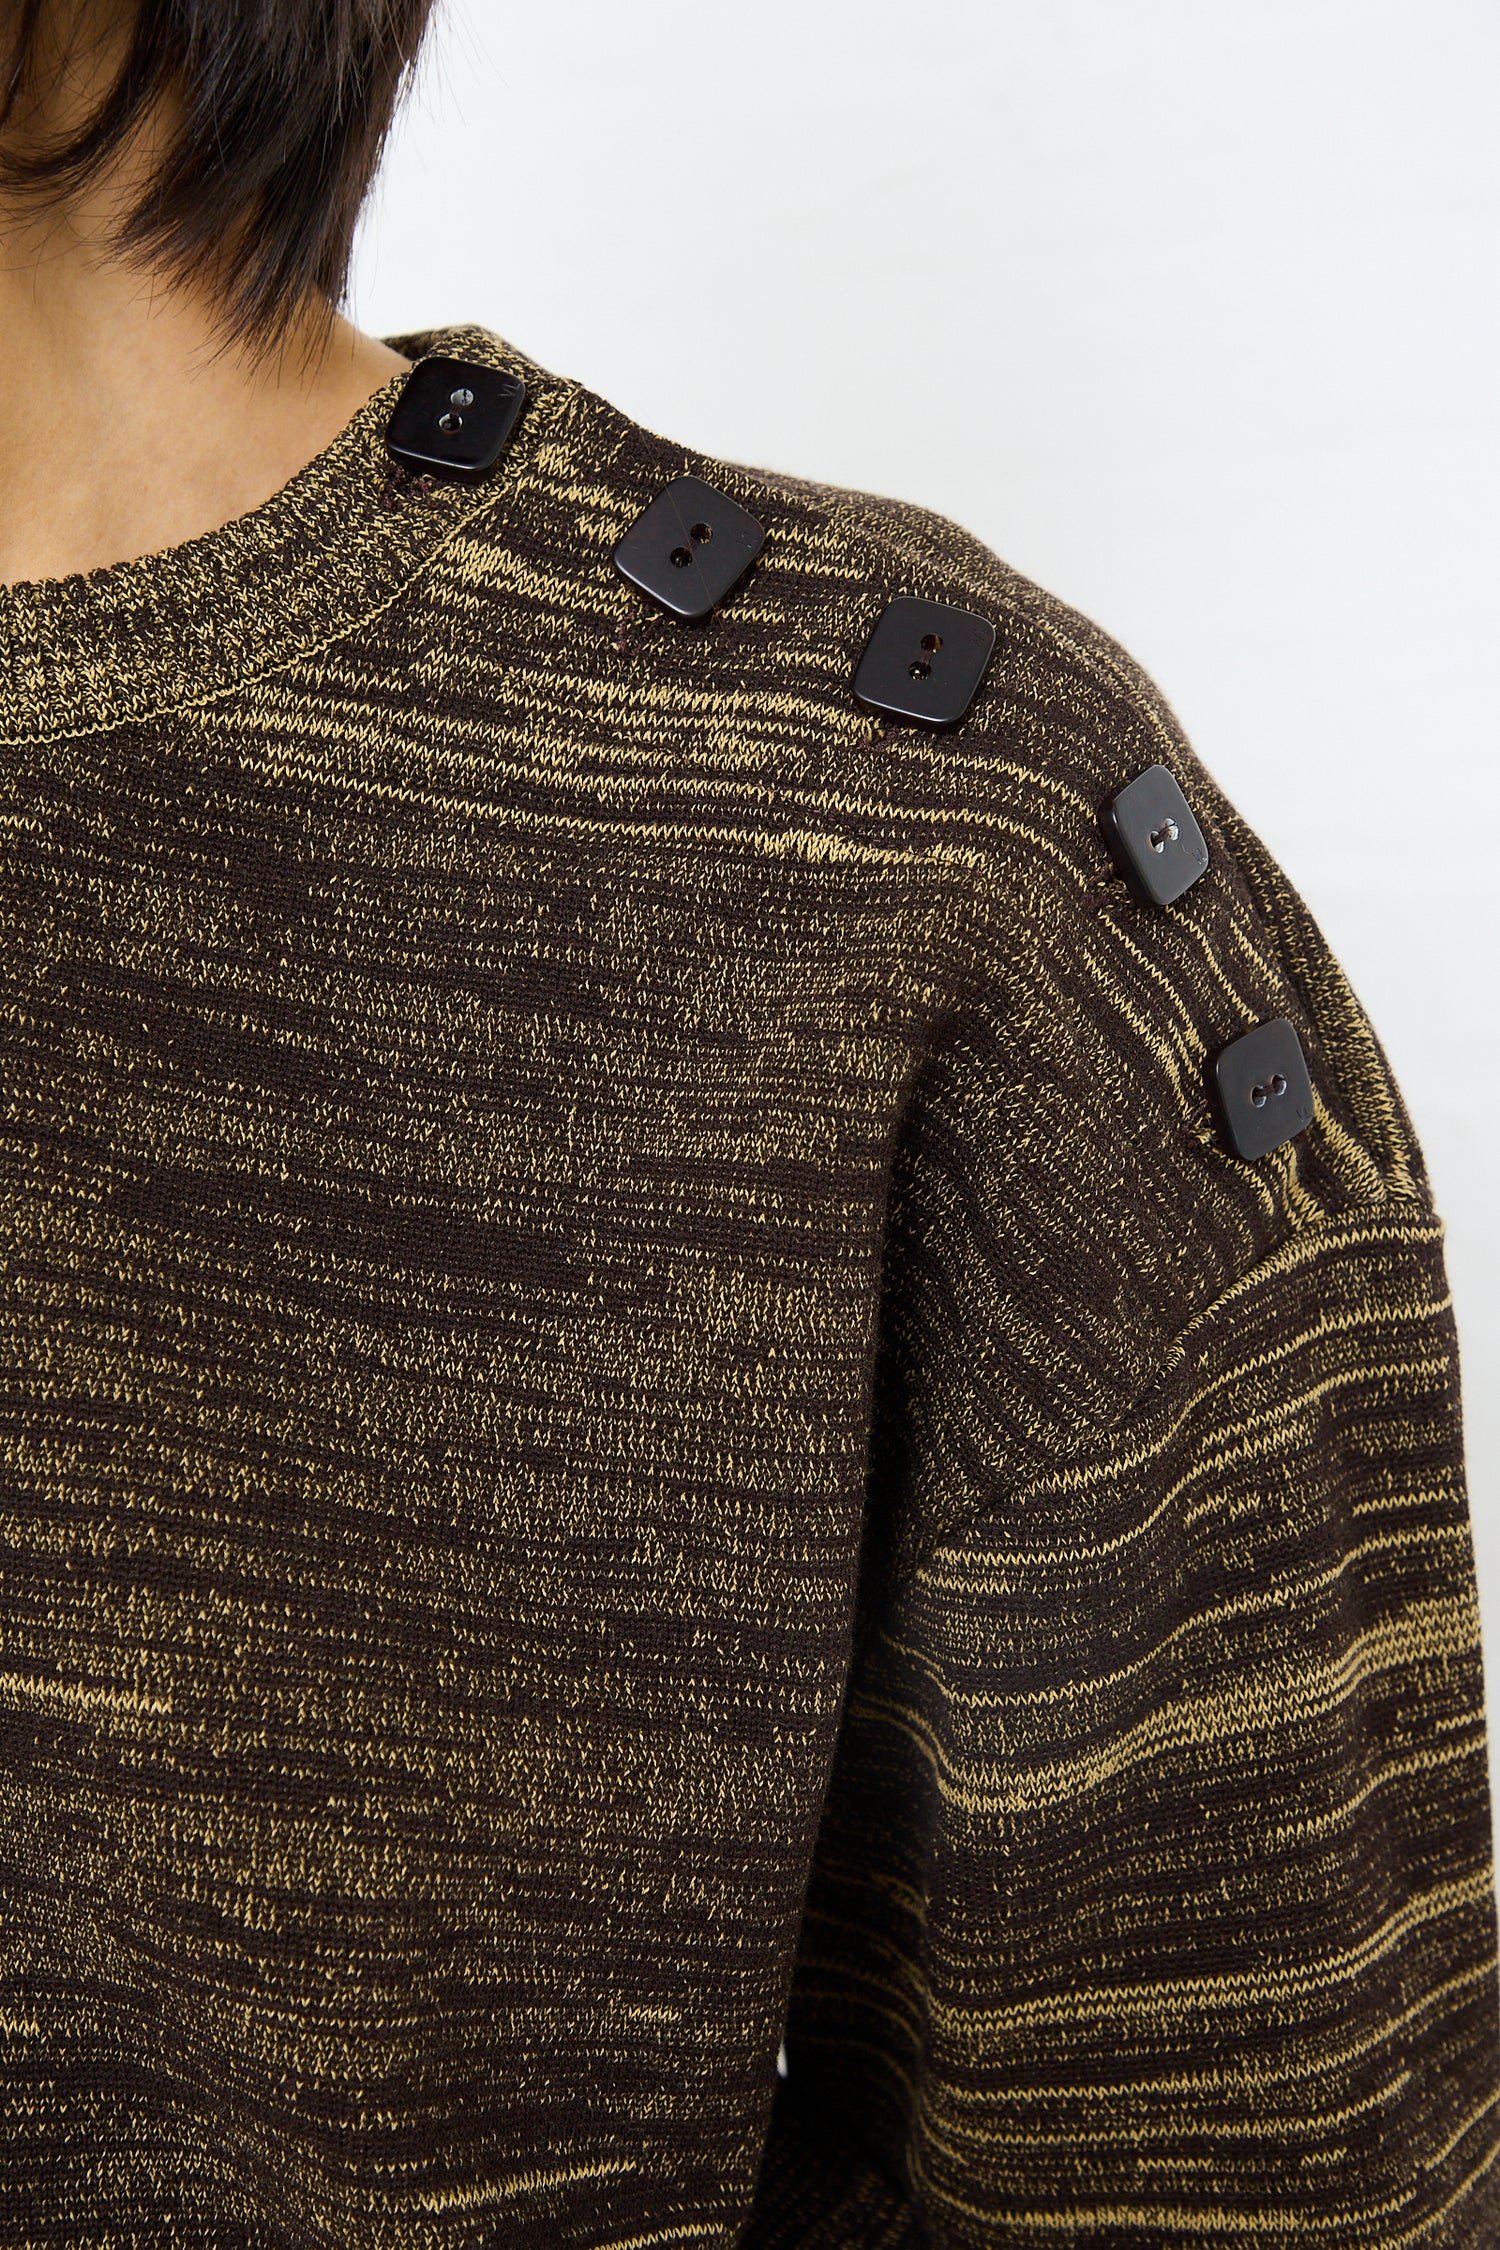 Close-up of a person wearing a Veronique Leroy Cotton Boxy Sweater in Pepper with decorative buttons on the shoulder.